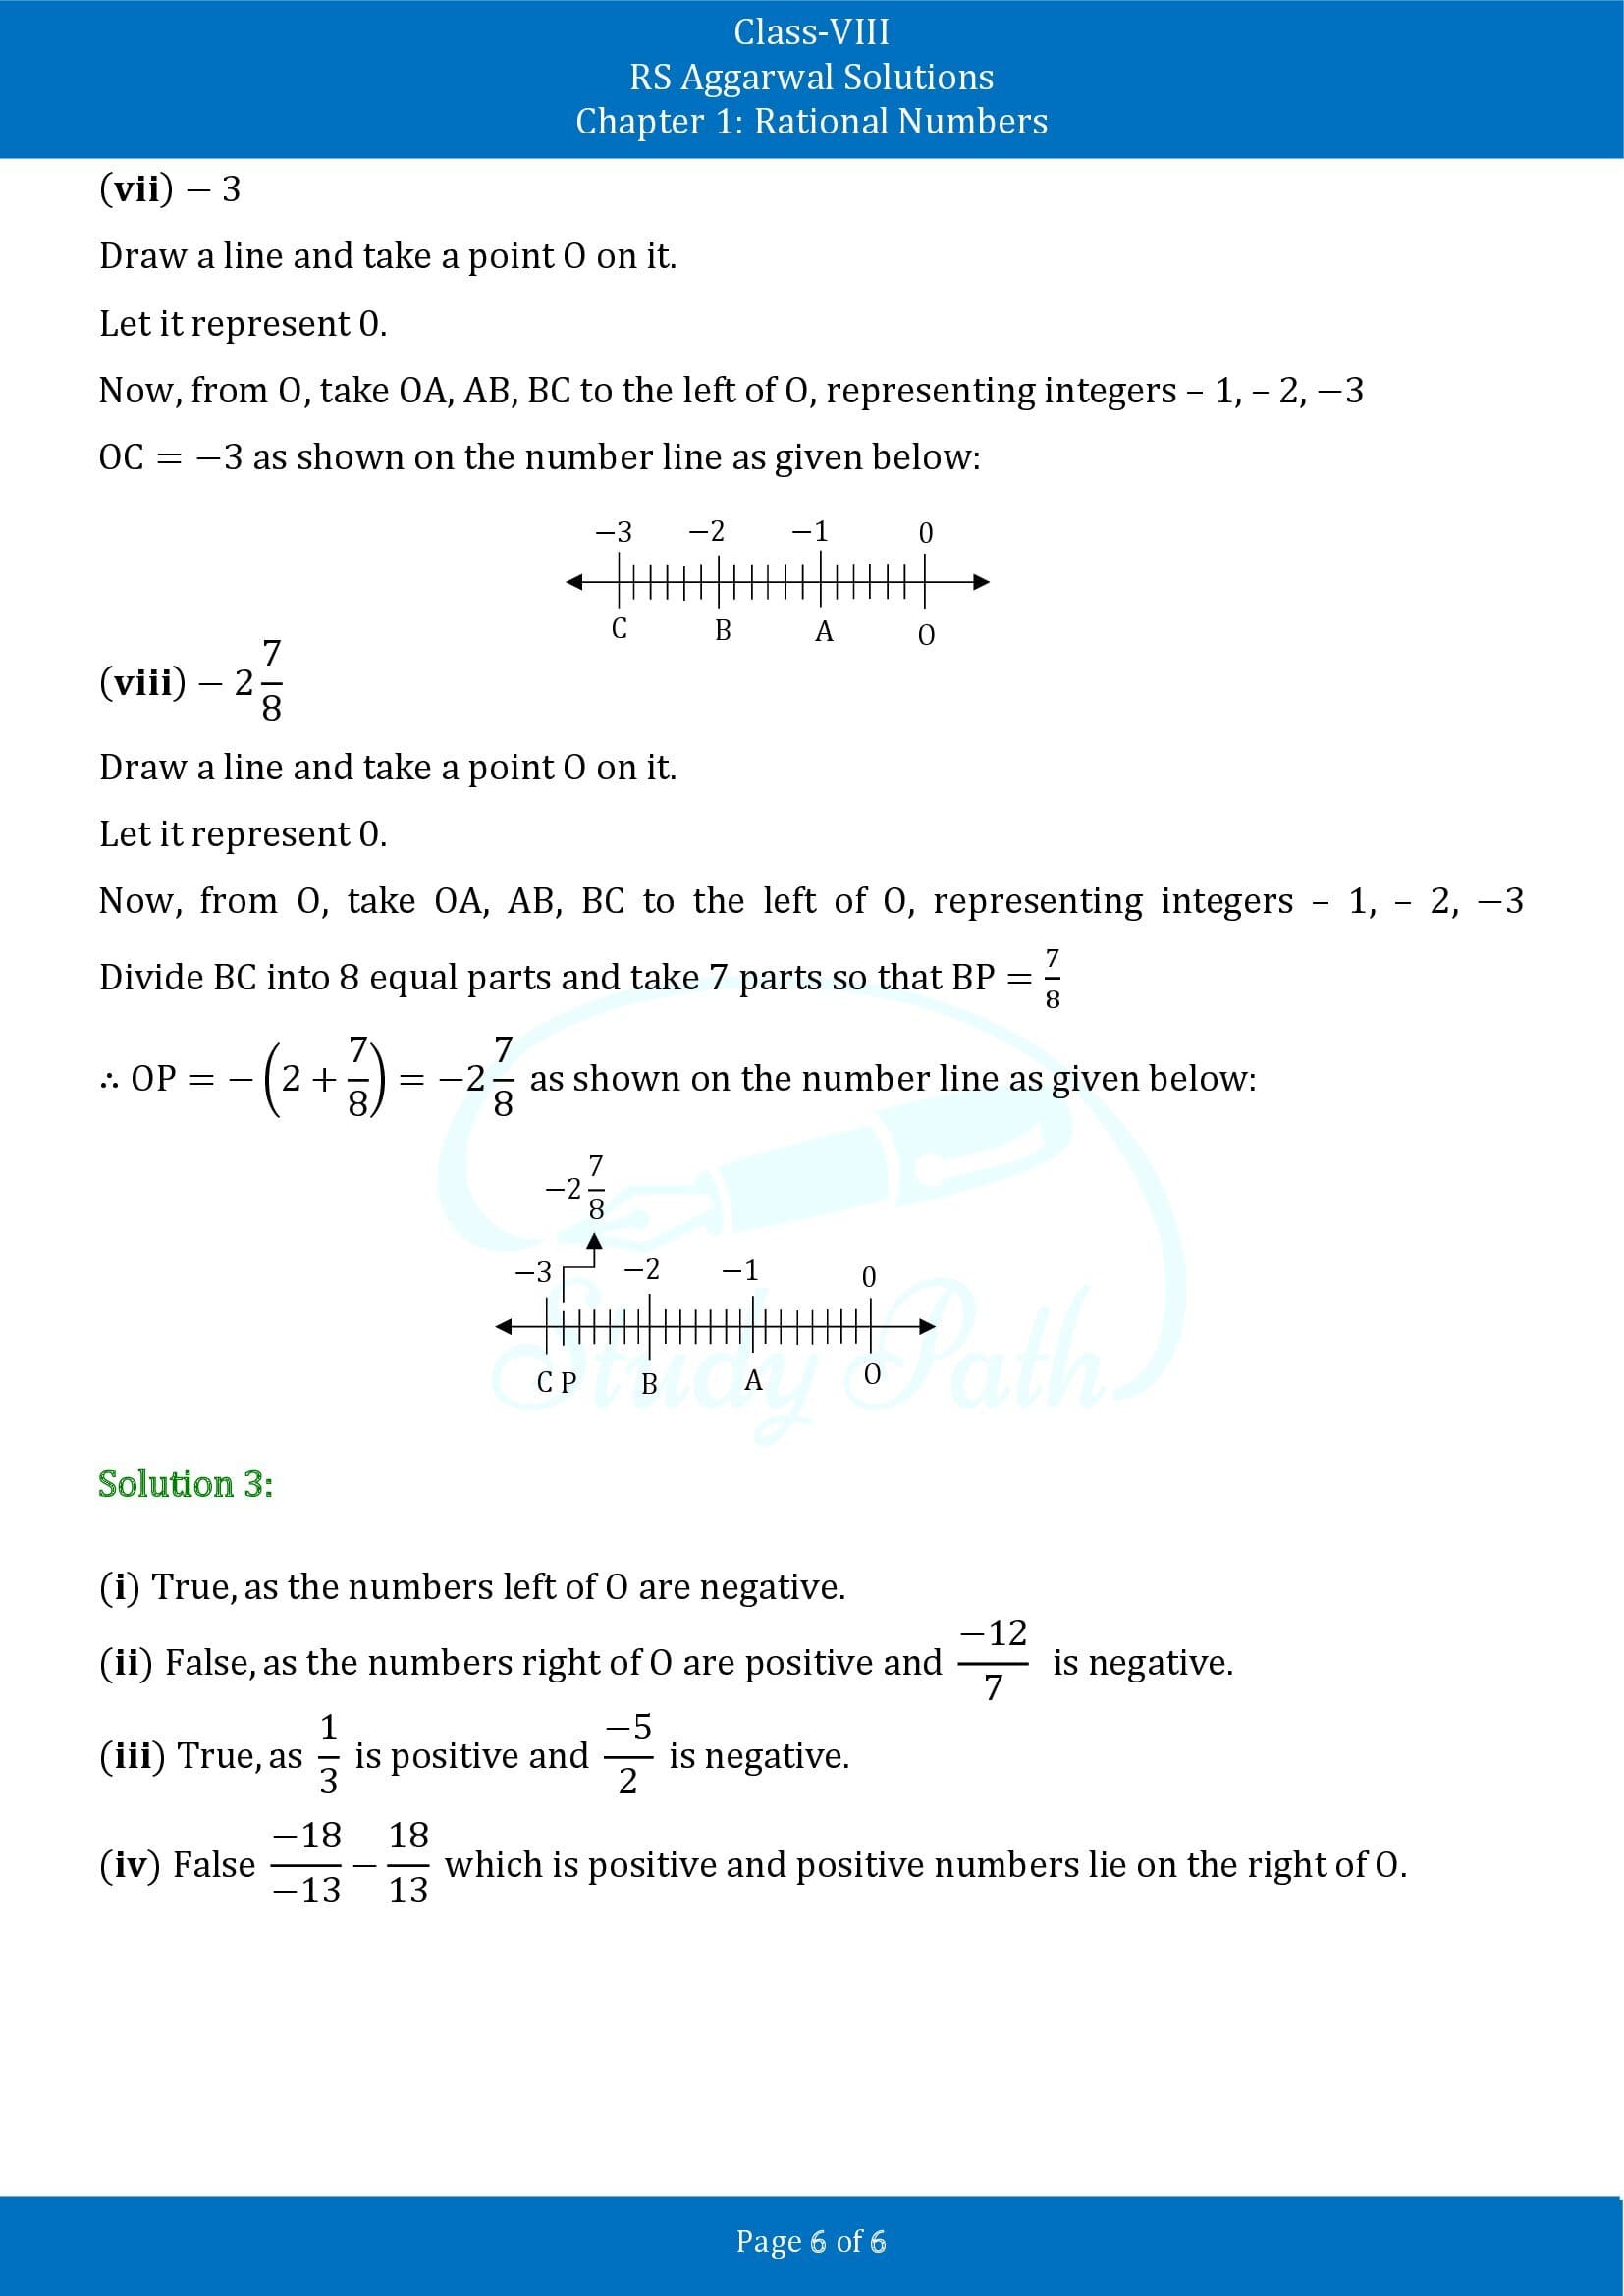 RS Aggarwal Solutions Class 8 Chapter 1 Rational Numbers Exercise 1B 00006